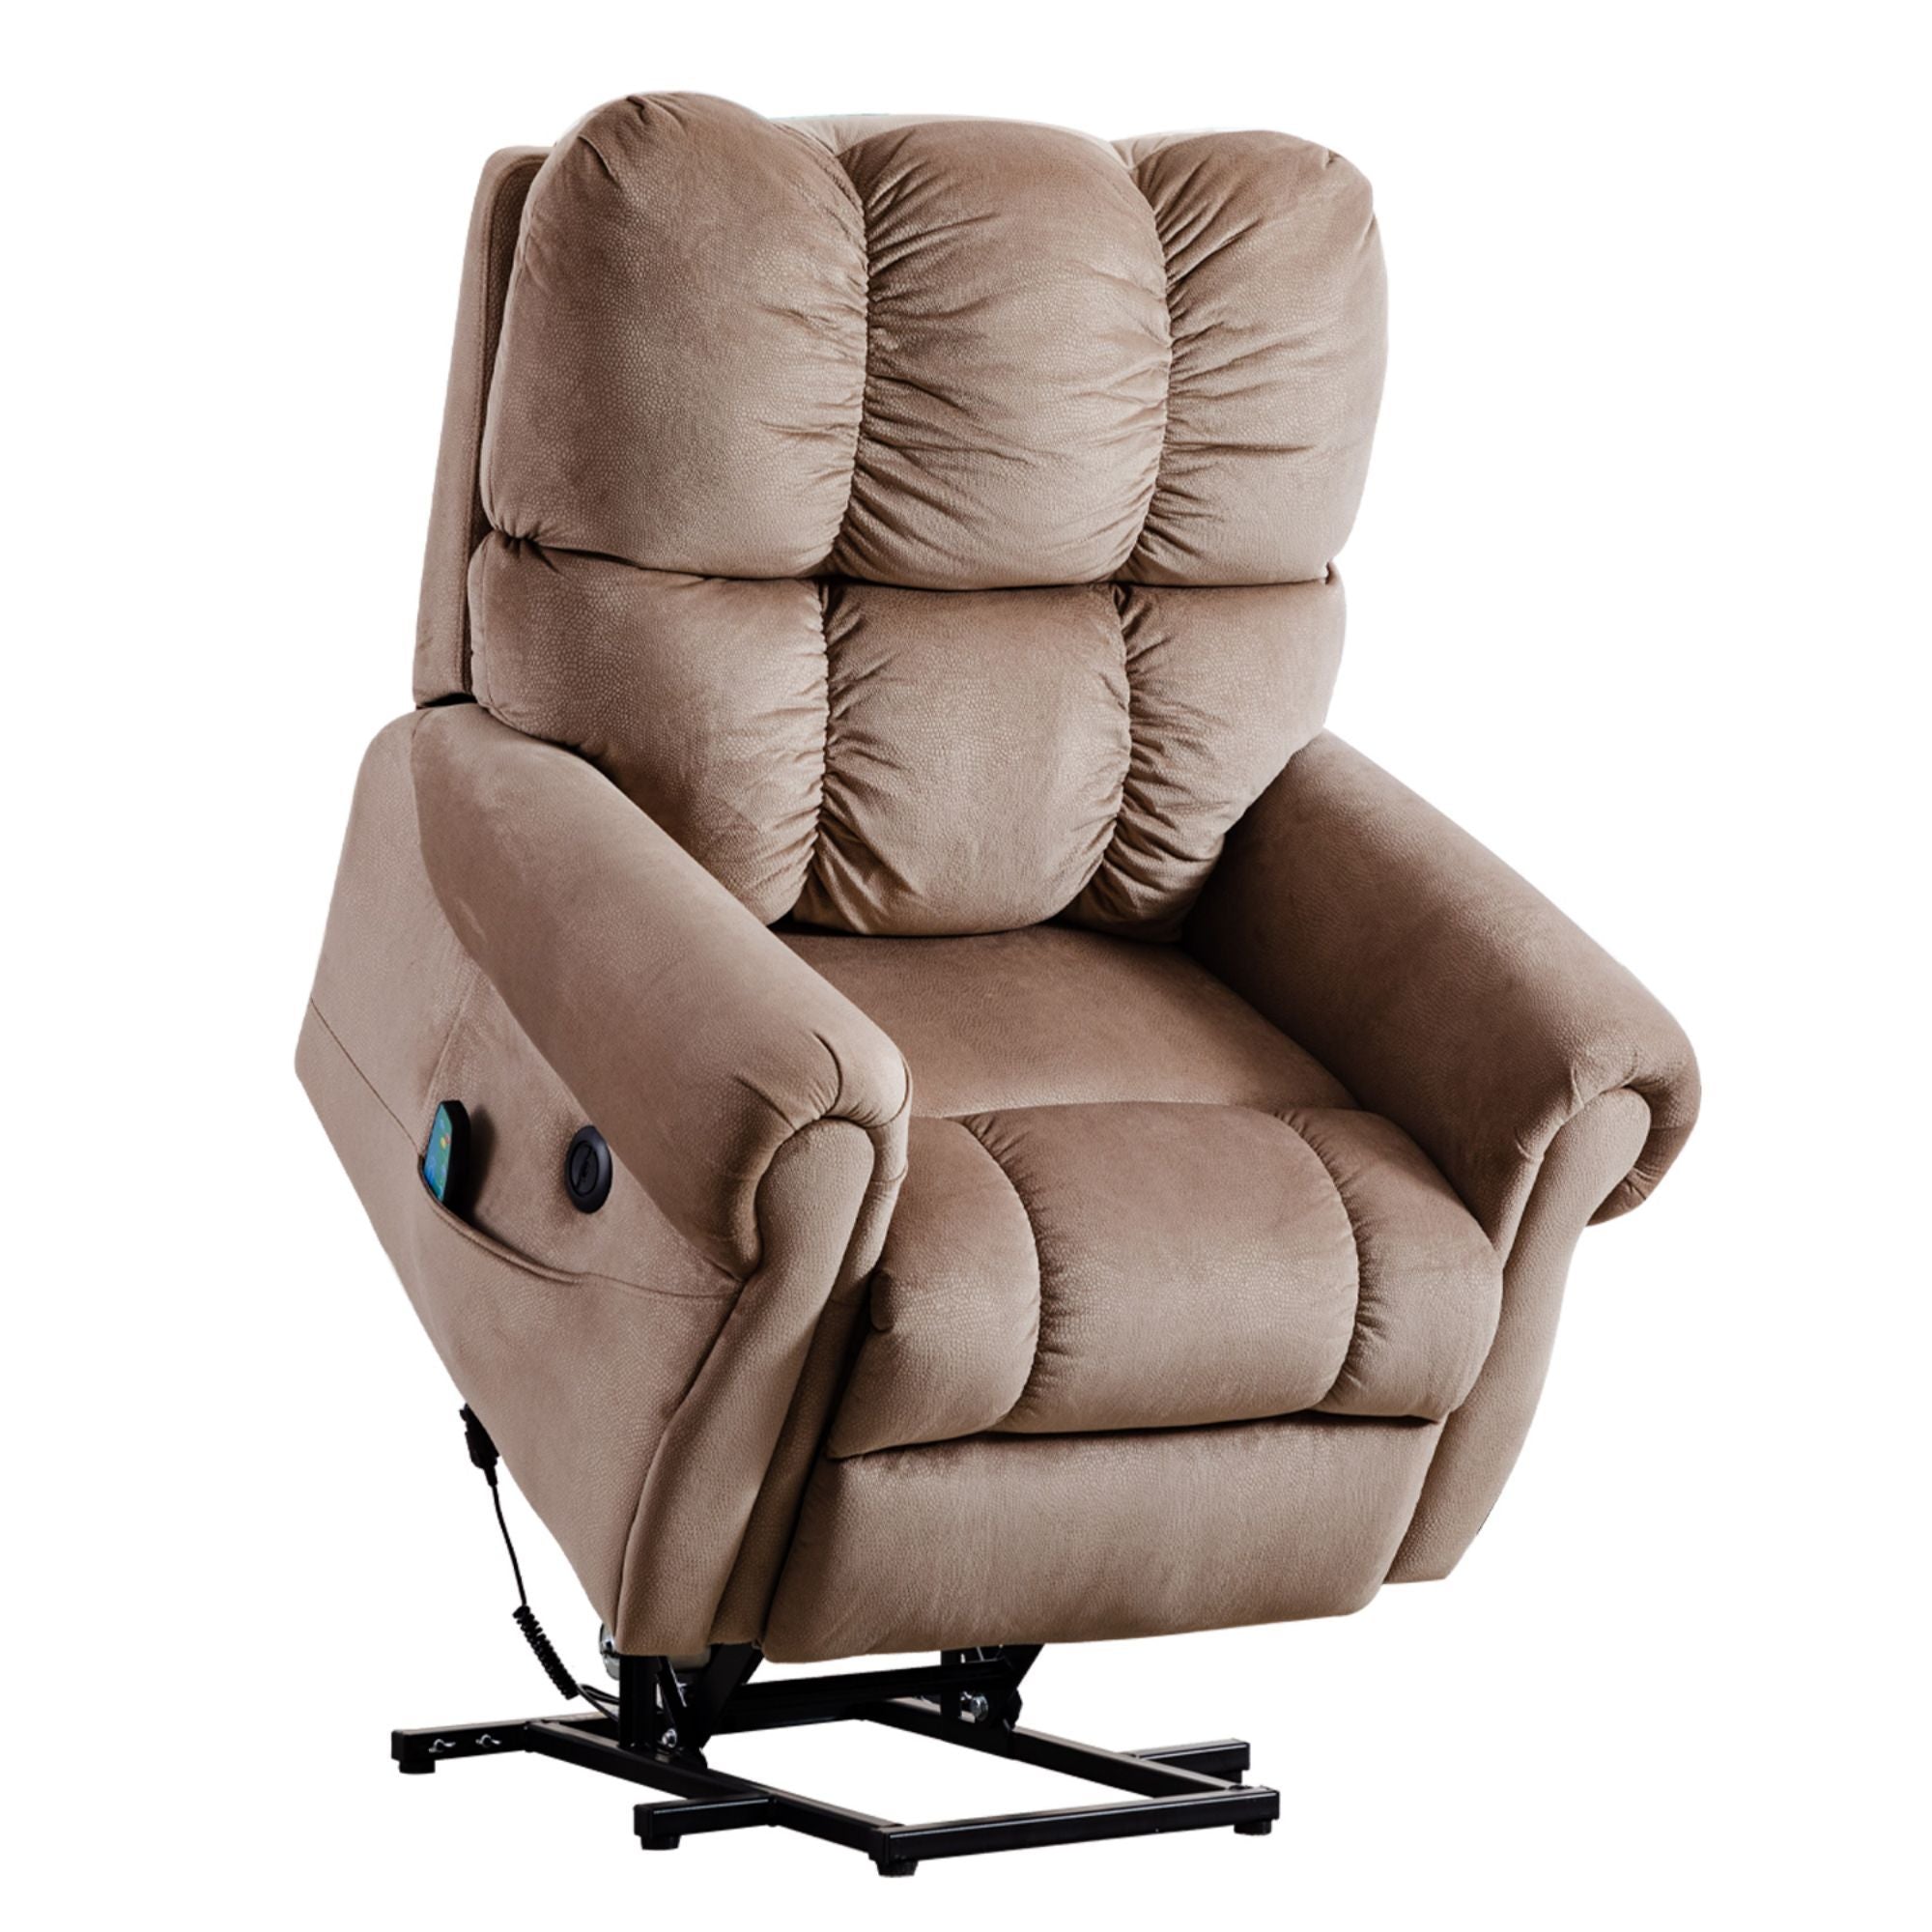 Electric lift recliner with heat therapy and massage, suitable for the elderly, heavy recliner, with modern padded arms and back, light brown